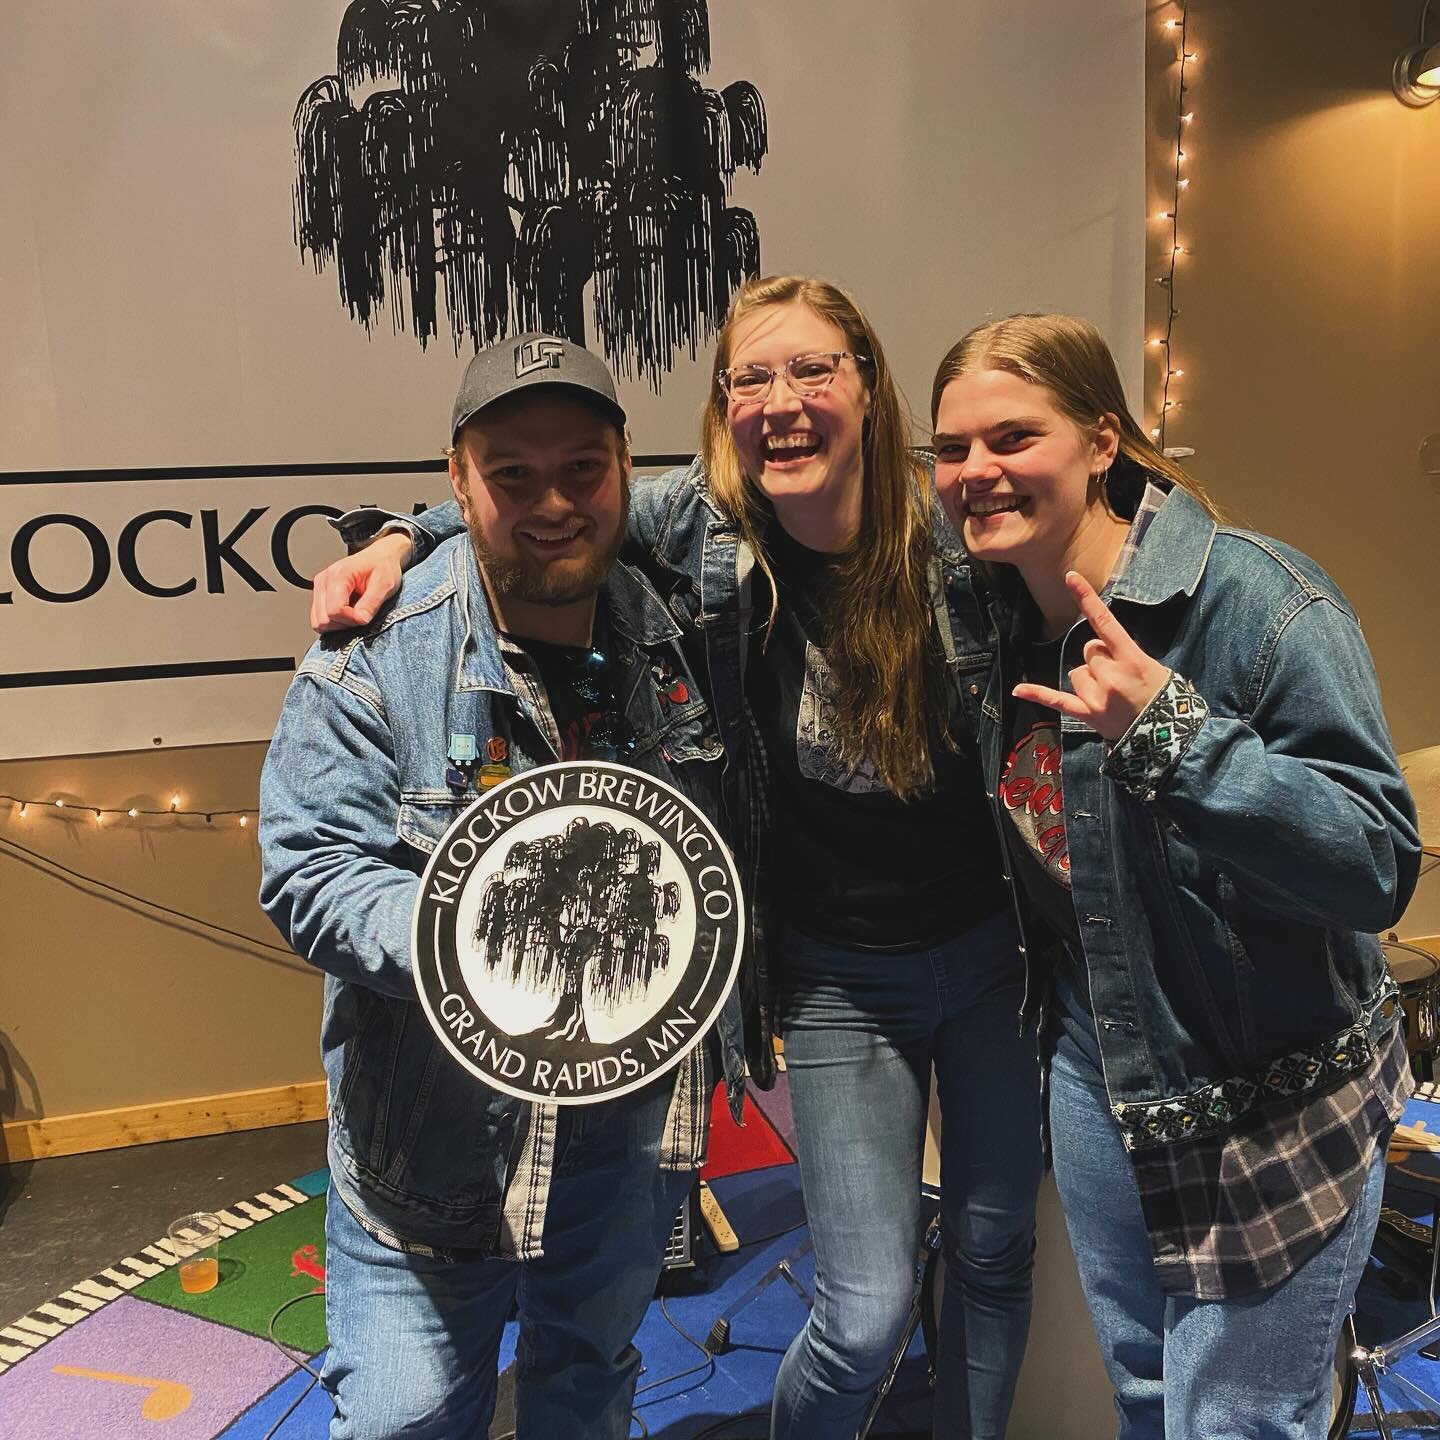 Huge thanks to everyone who came out last night for the 48 Hour Band Contest! It was a tough competition, but The Mockups (Zach Nichols, Angie Erickson, and Avrielle Schneider) took home first prize. Despite only one winner, a good time was had by al